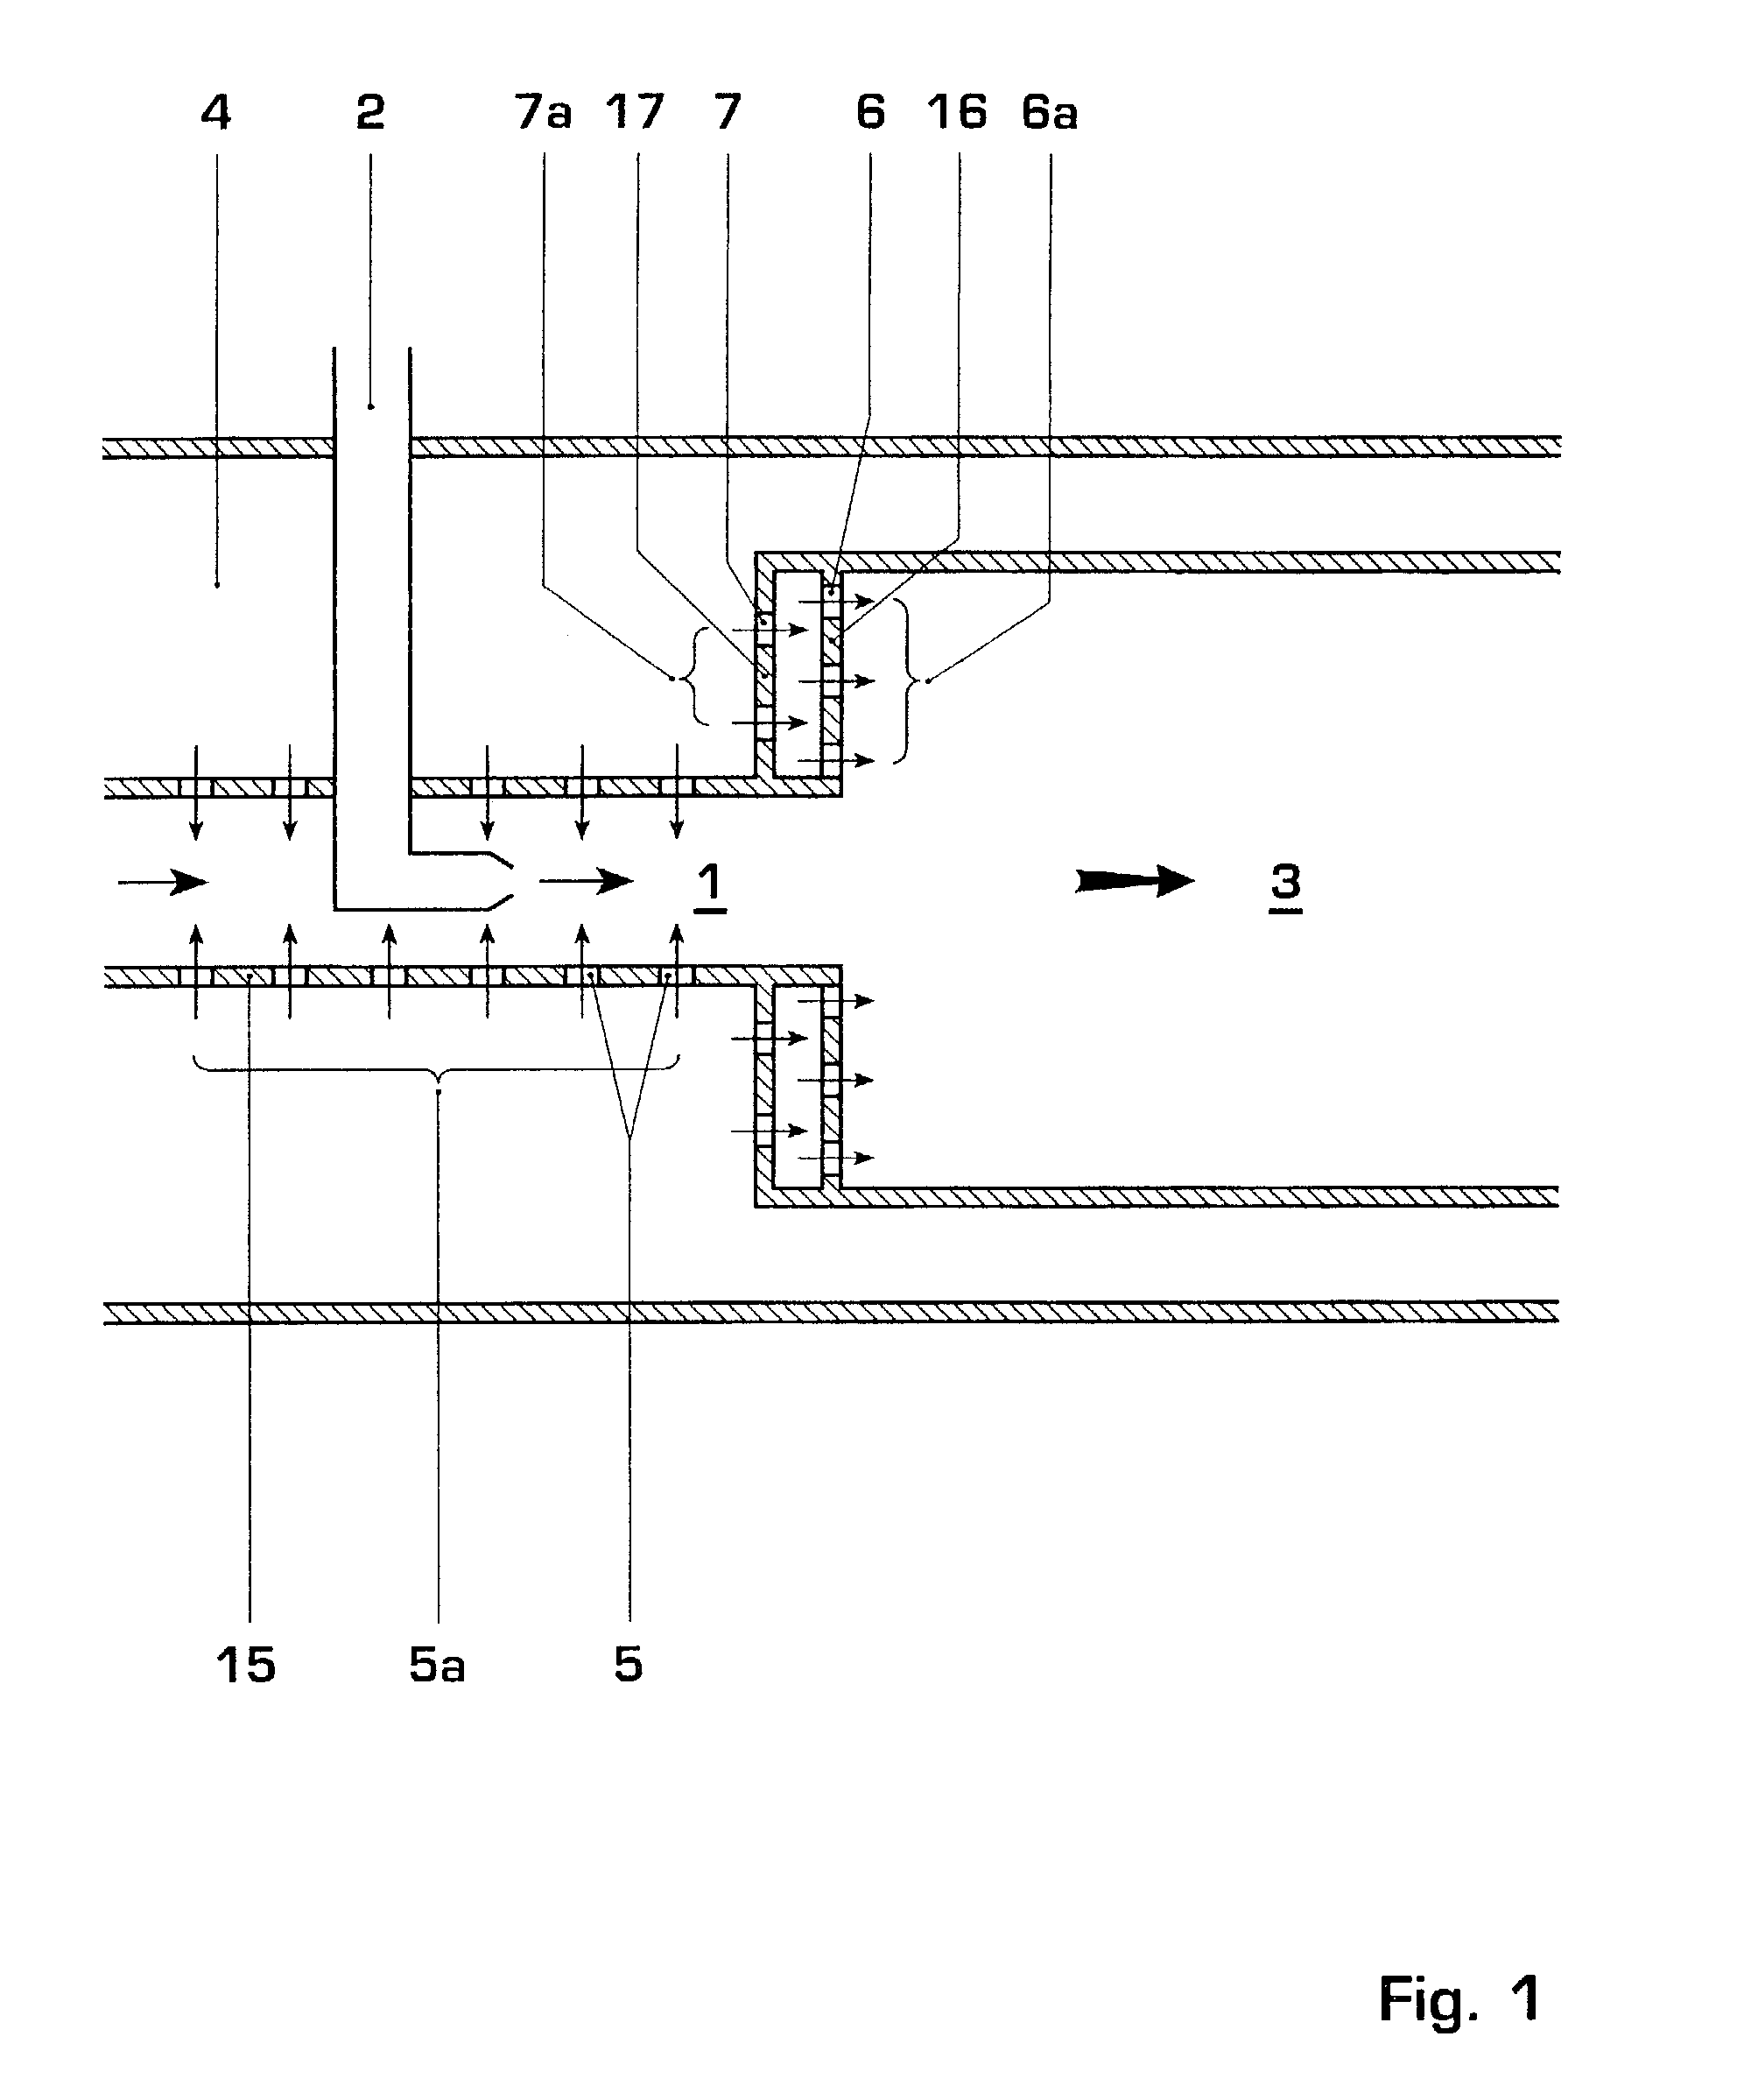 Reheat combustion system for a gas turbine